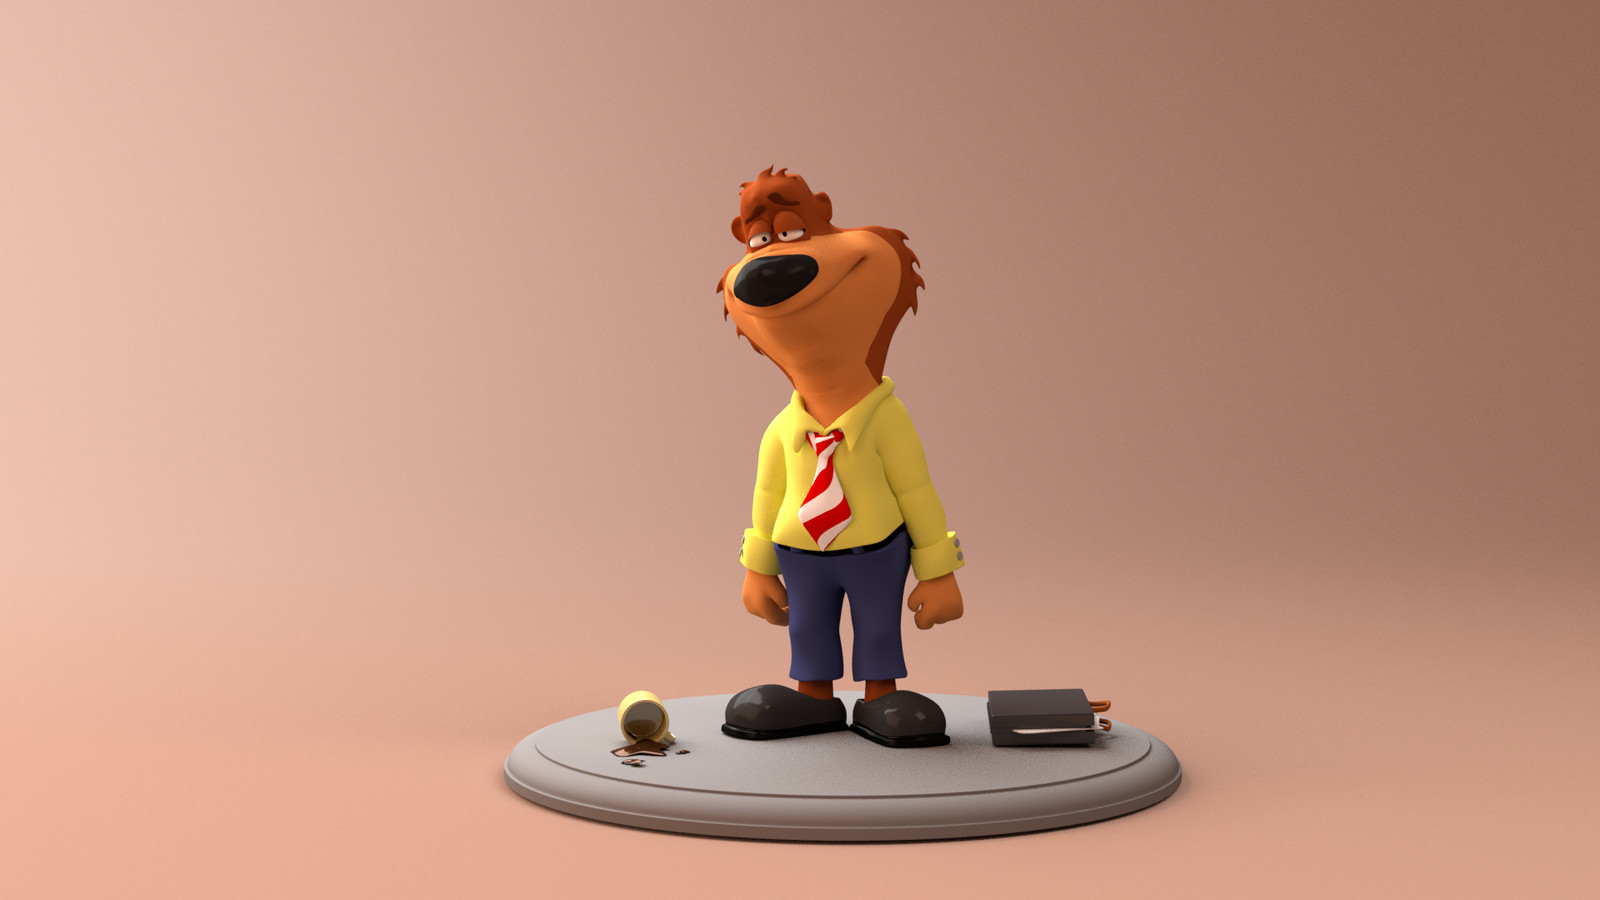 The Working Man, 3D model and design